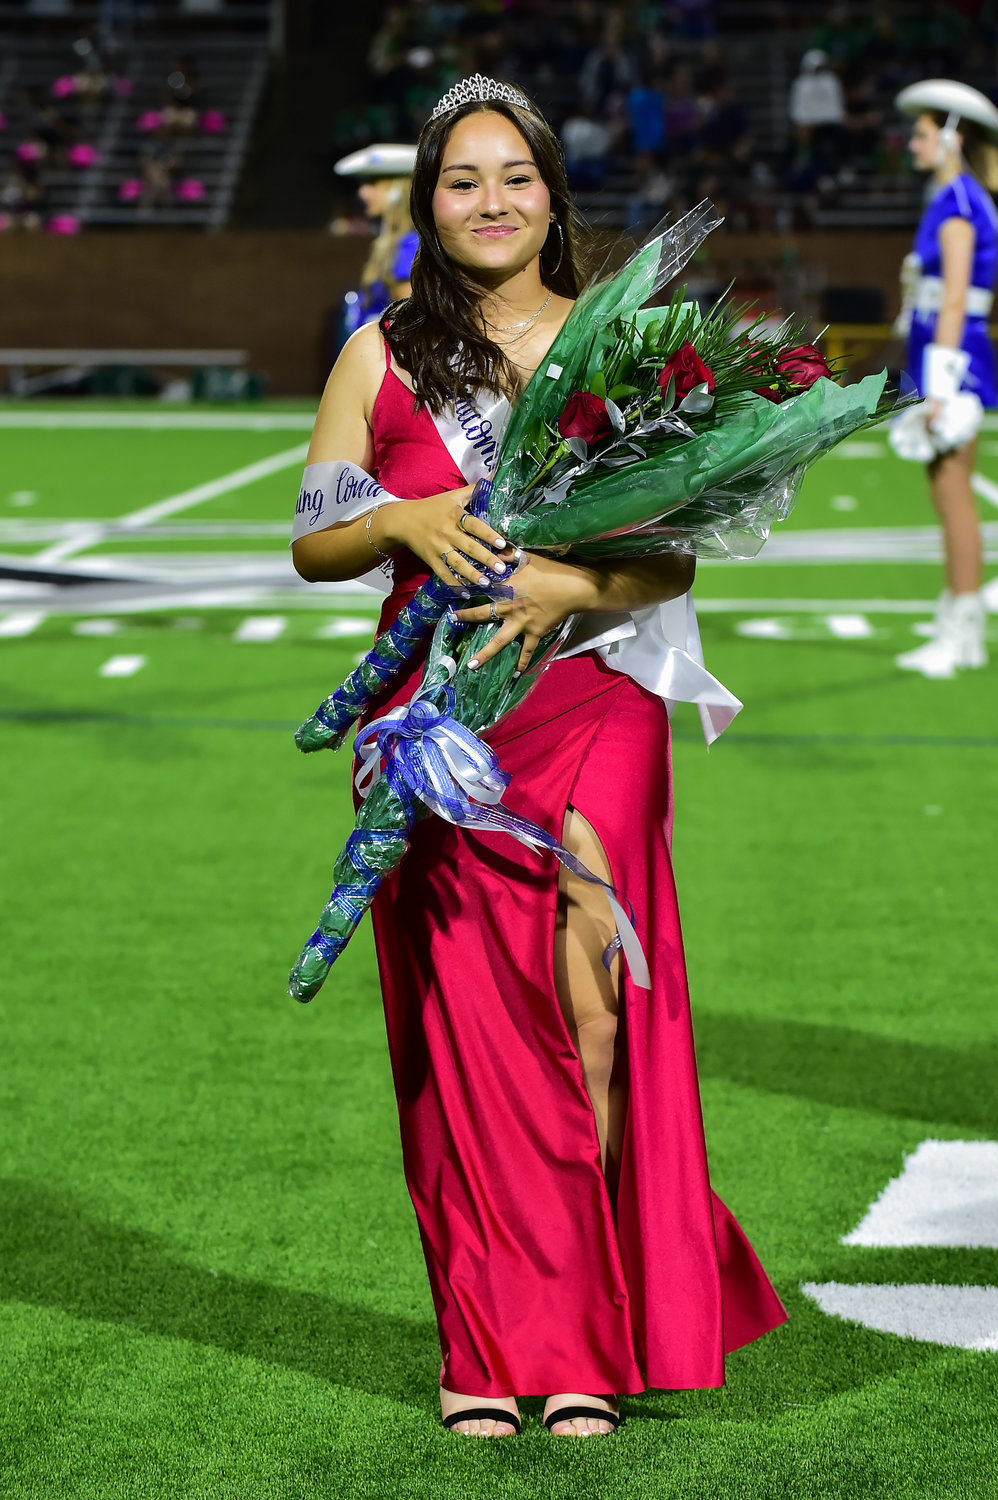 Martisa Jimenez was named the Taylor homecoming queen.